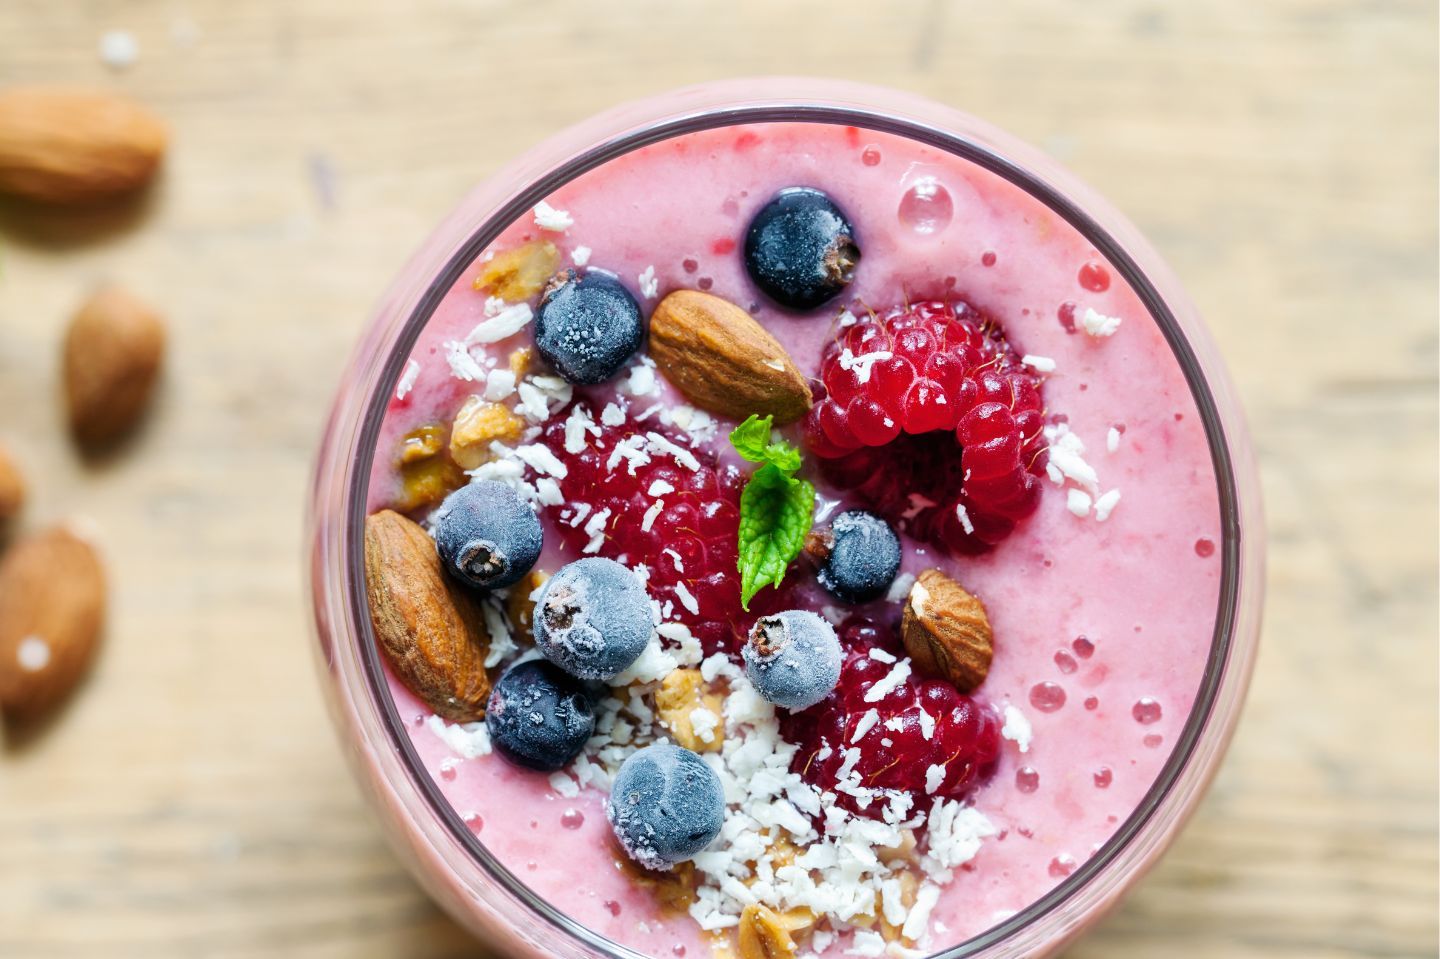 Healthy smoothie recipes for breakfast